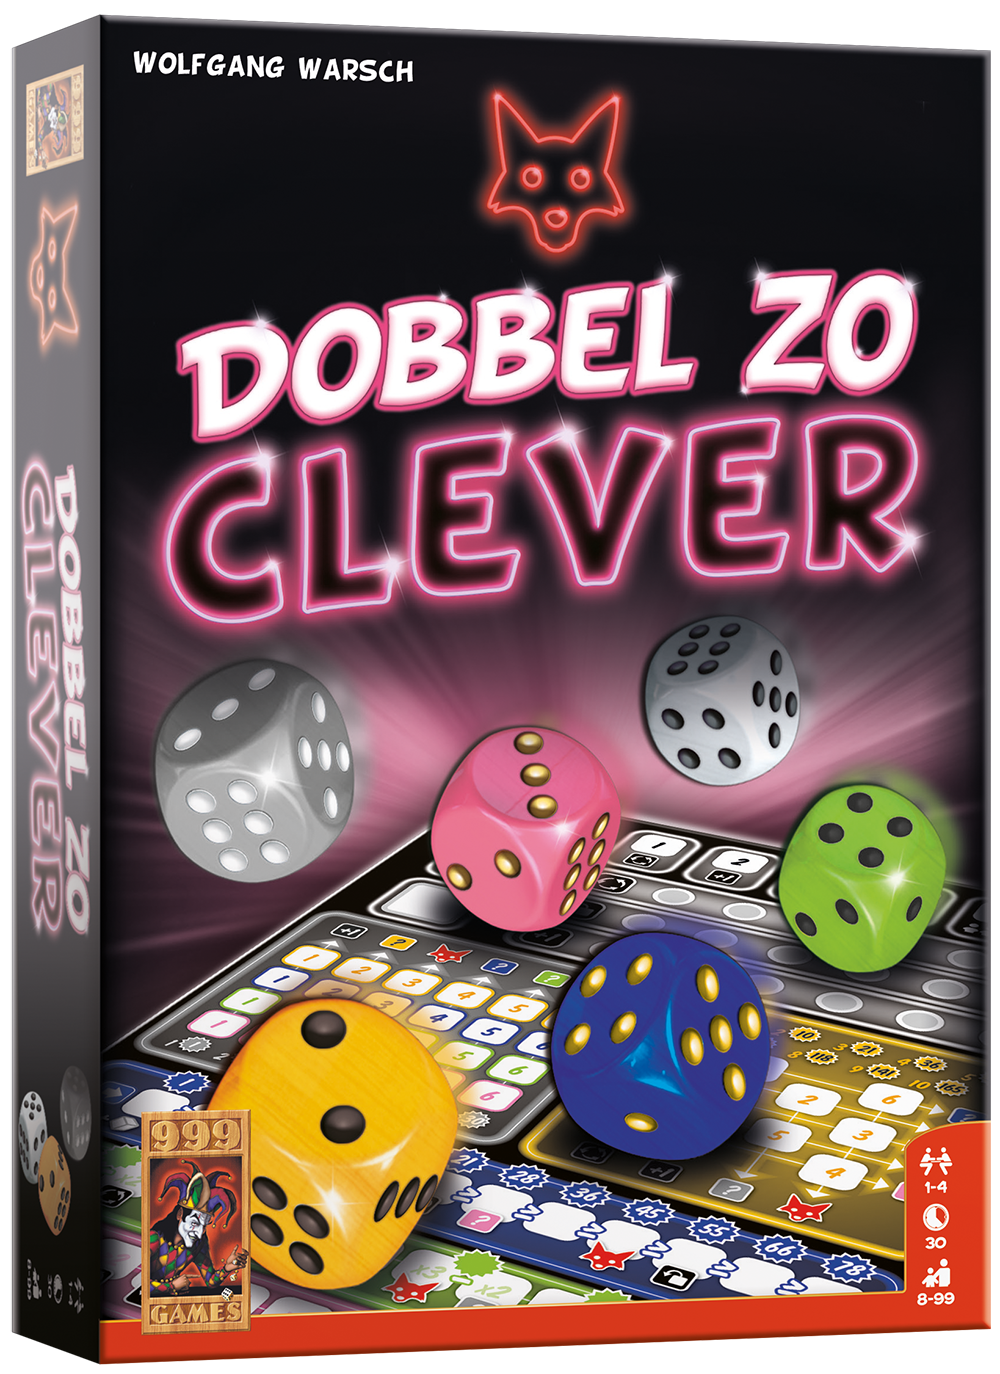 Clever - Dobbel zo Clever